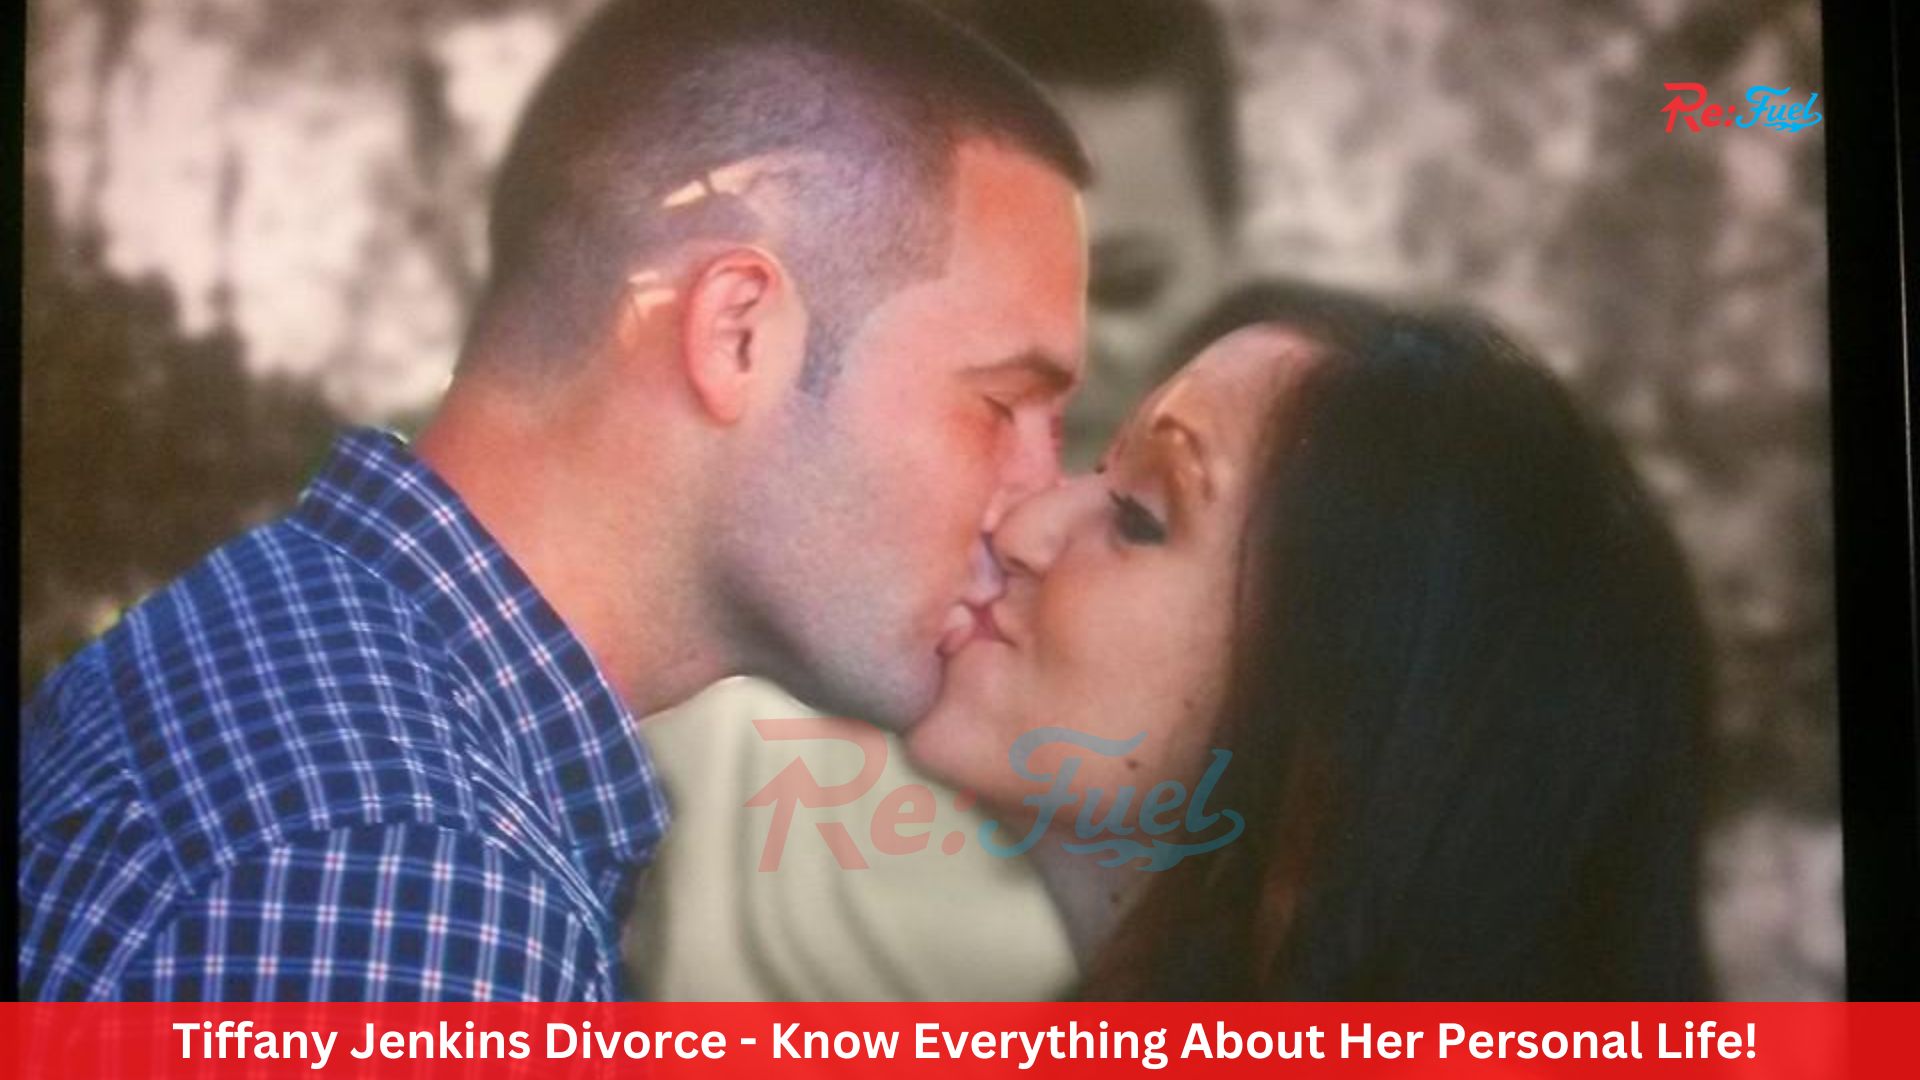 Tiffany Jenkins Divorce - Know Everything About Her Personal Life!